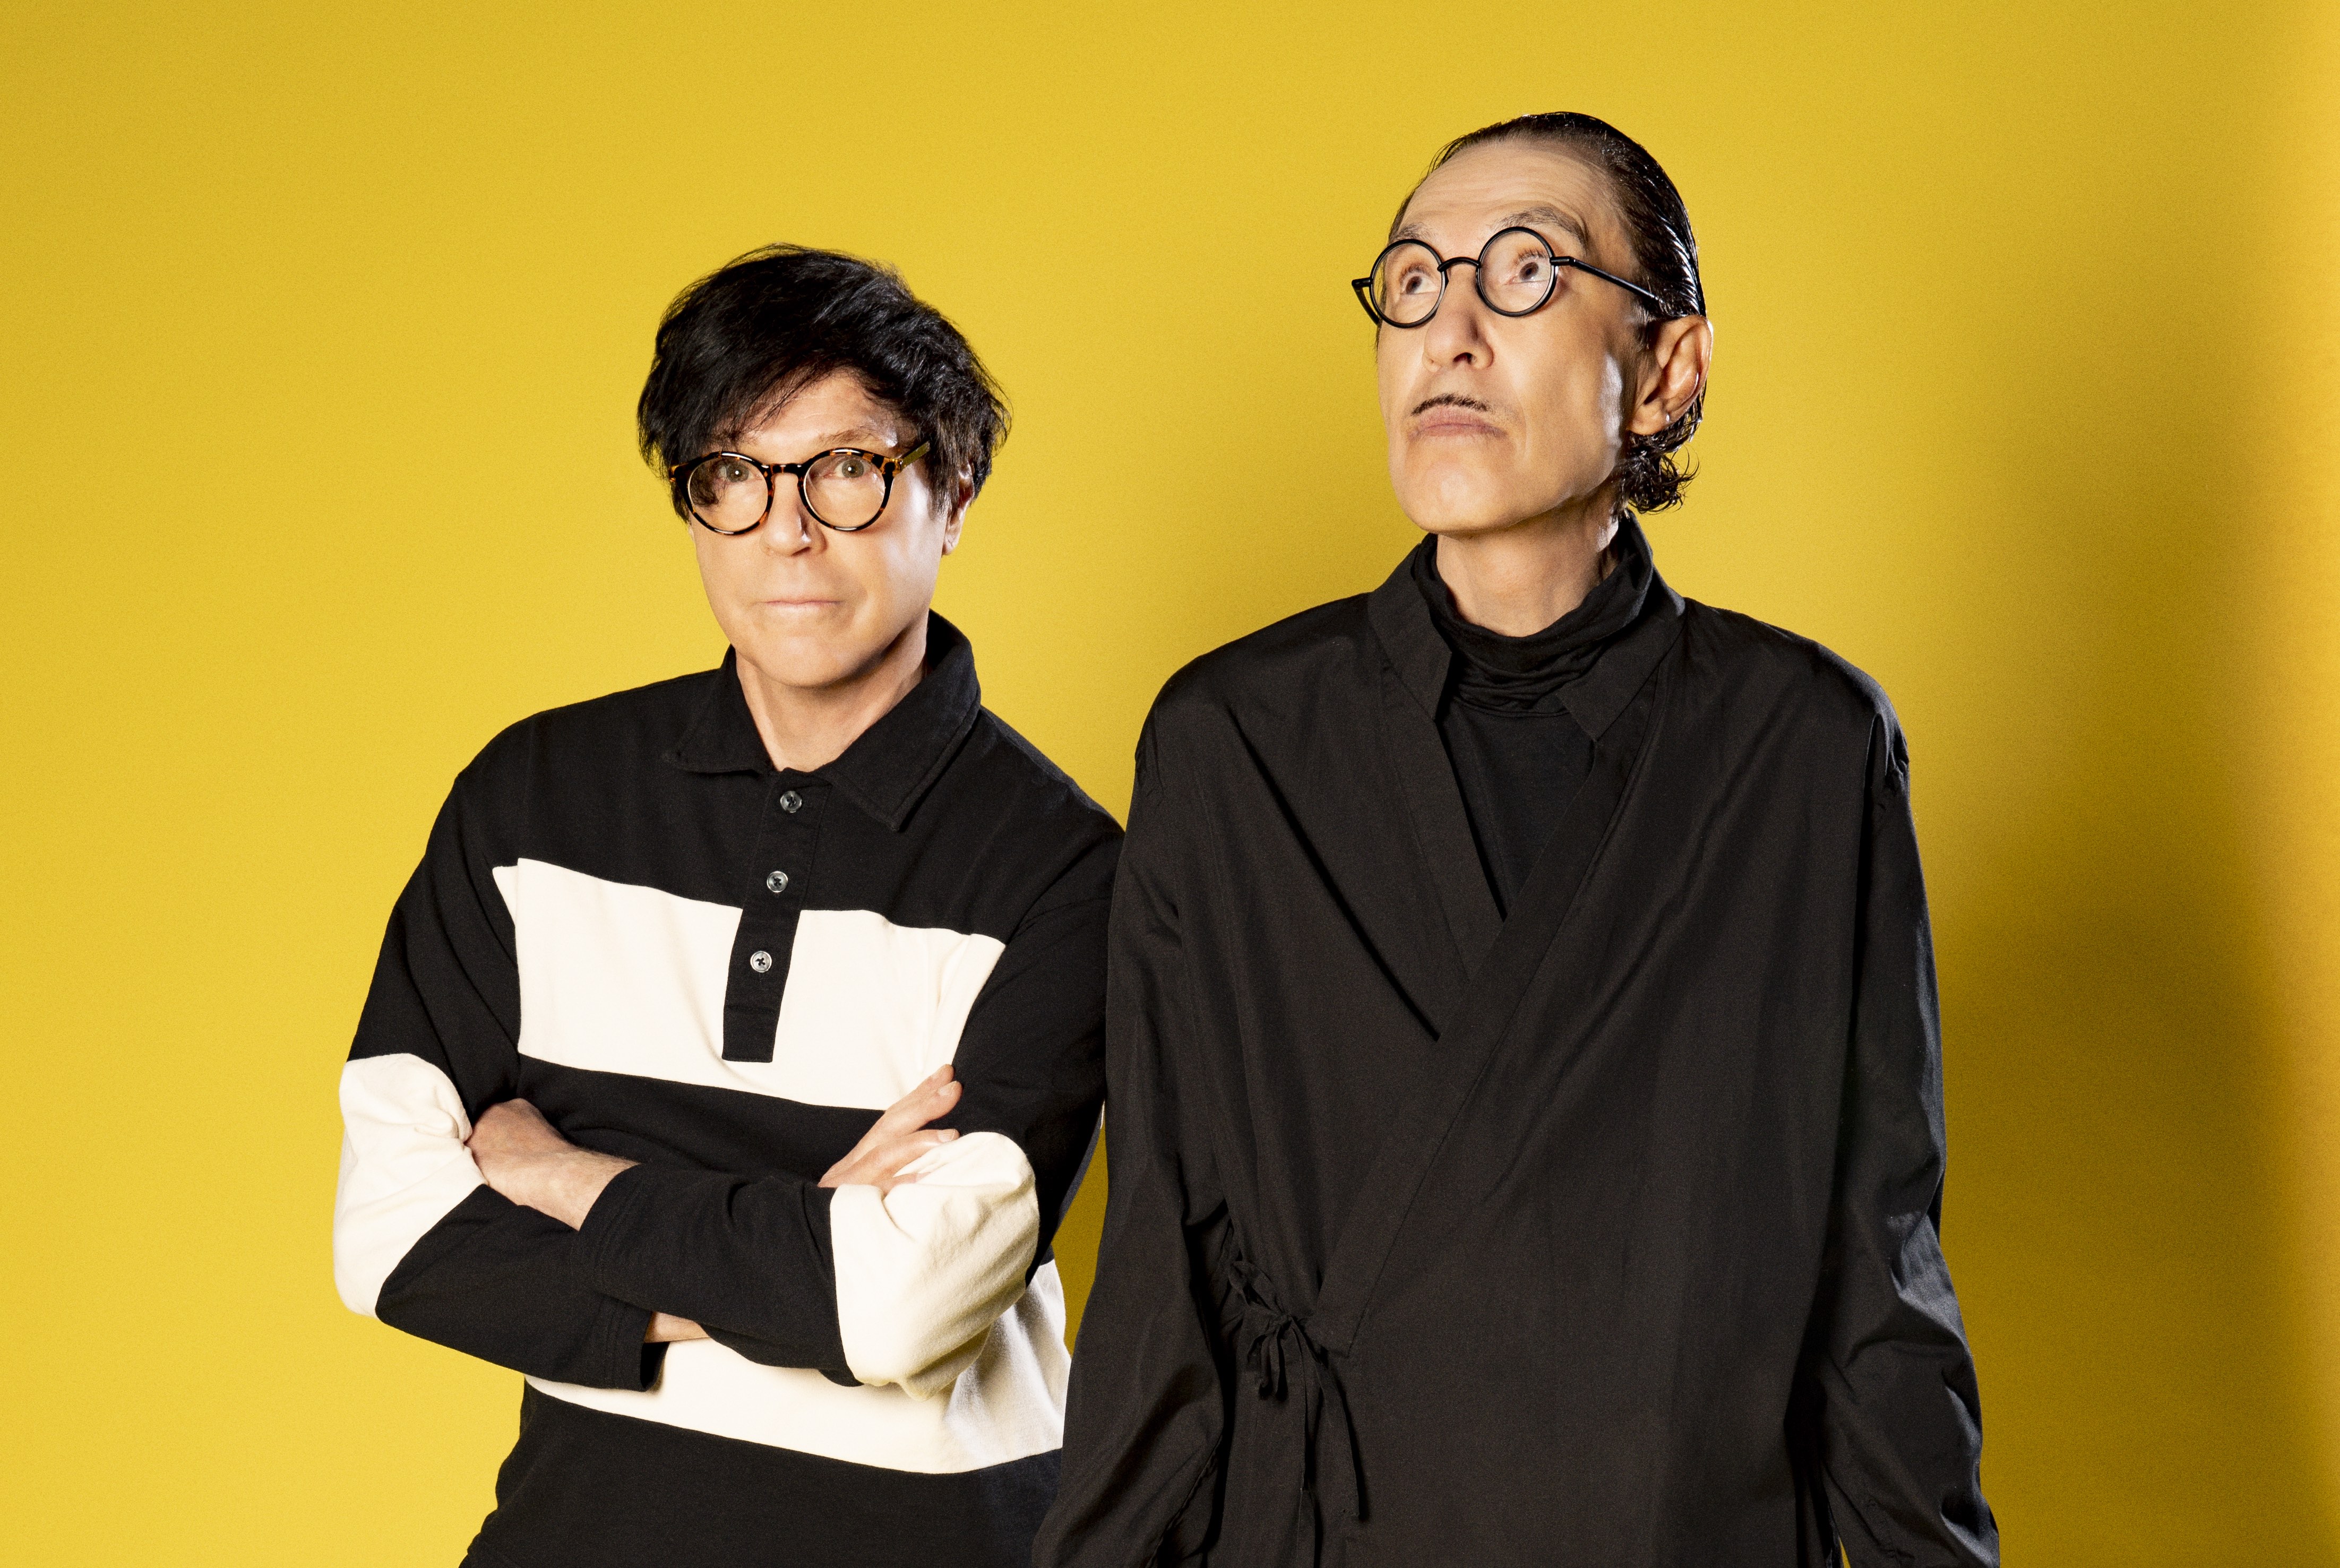 Russell Mael (left) and Ron Mael (right)
